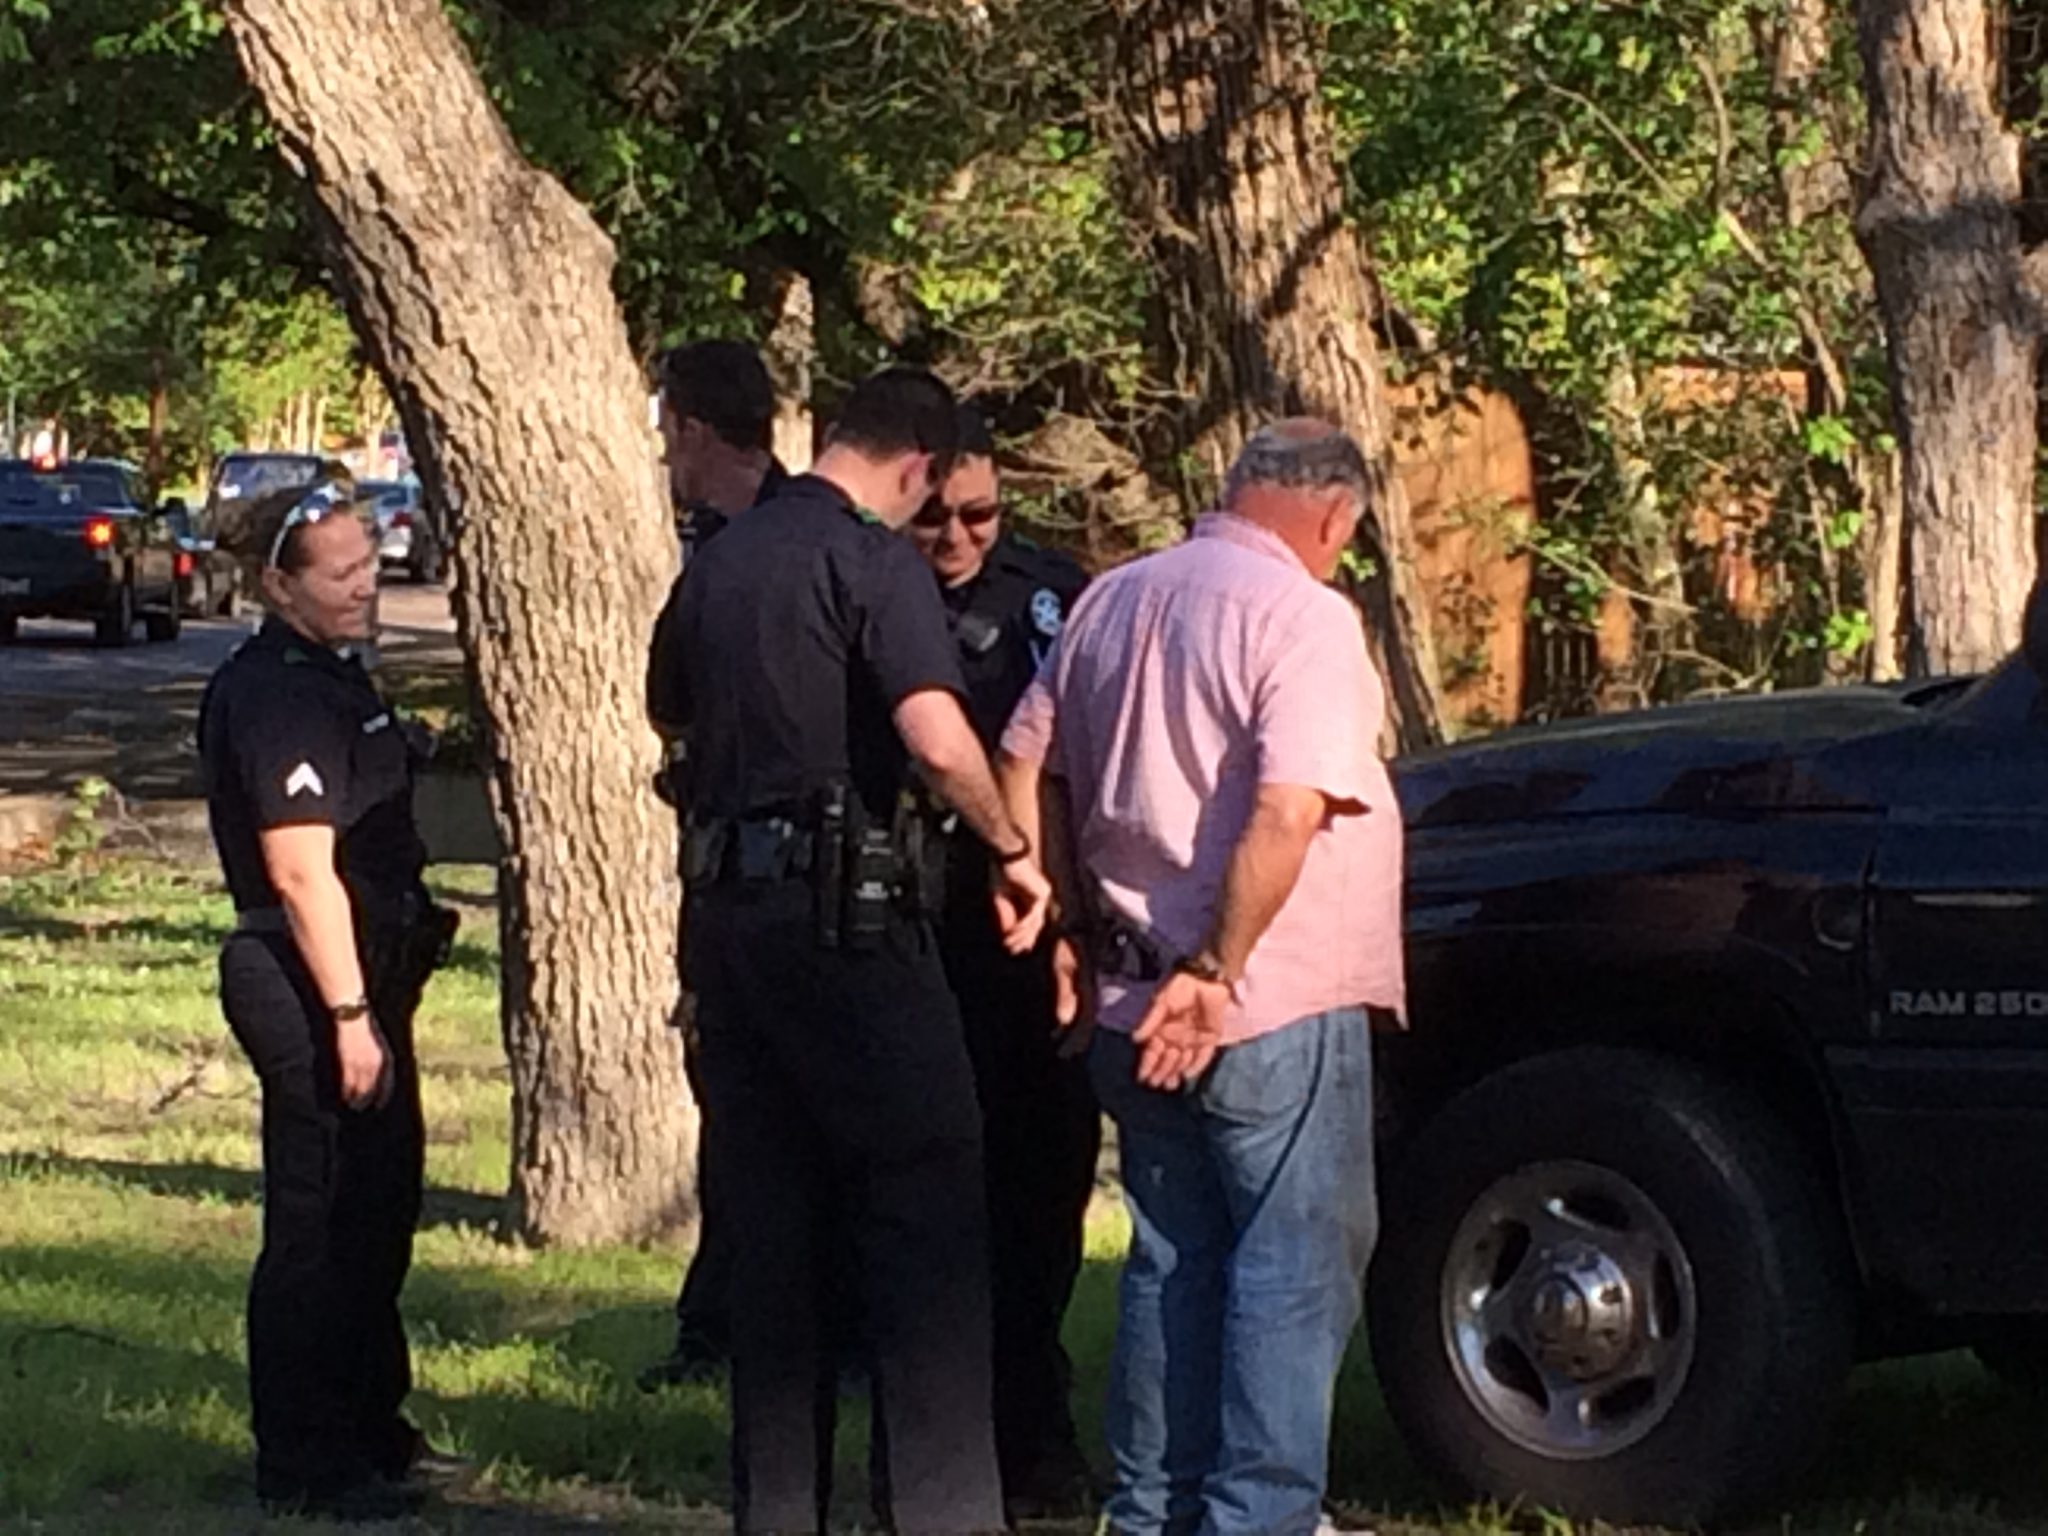 An unidentified man was arrested March 30 for cutting into the pecan 'Indian marker tree' off Peavy Road. (Photo by Amy Martin)